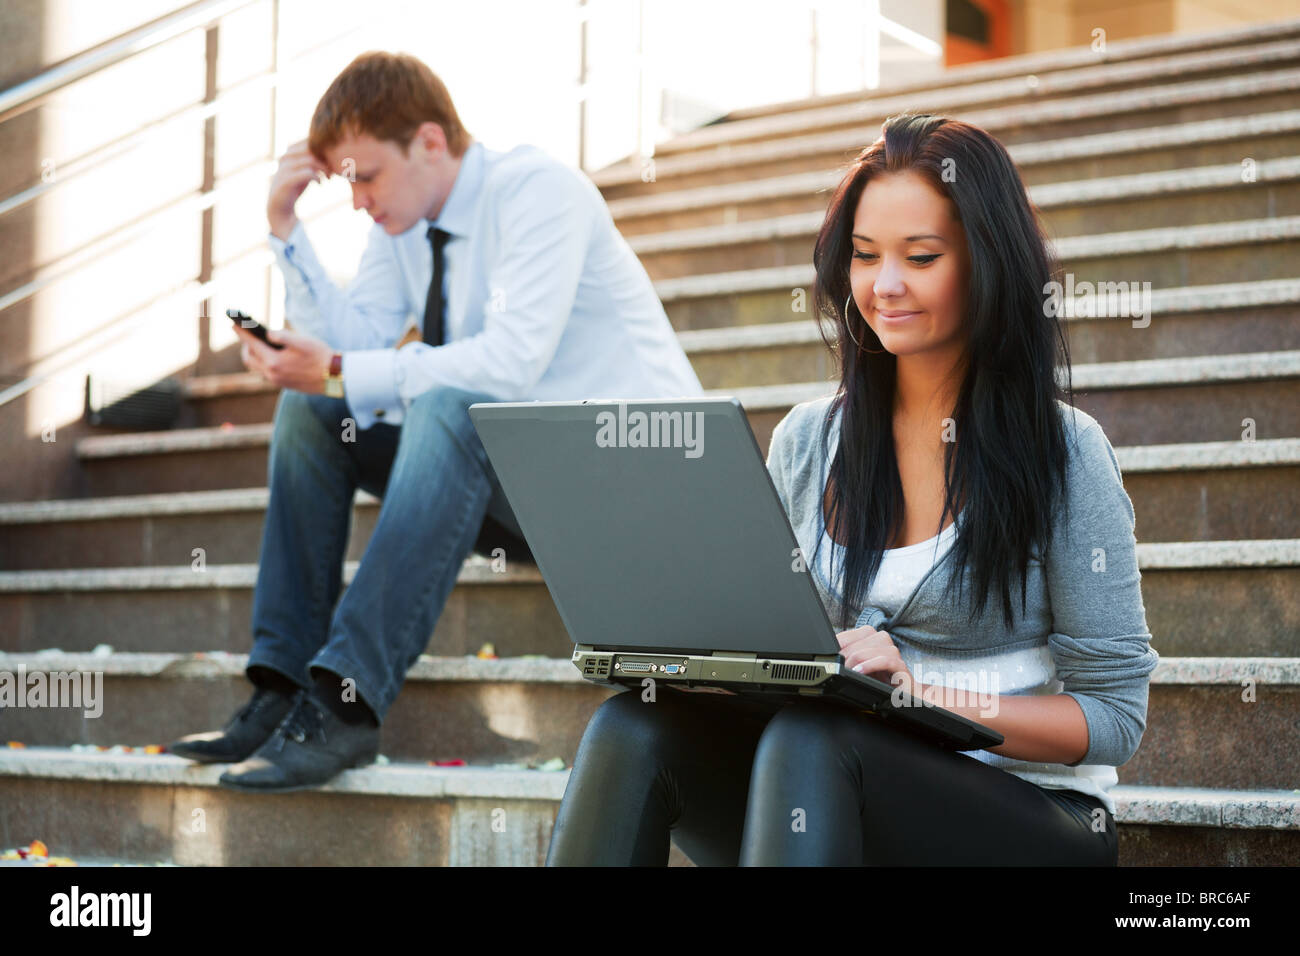 Young students on the steps. Stock Photo